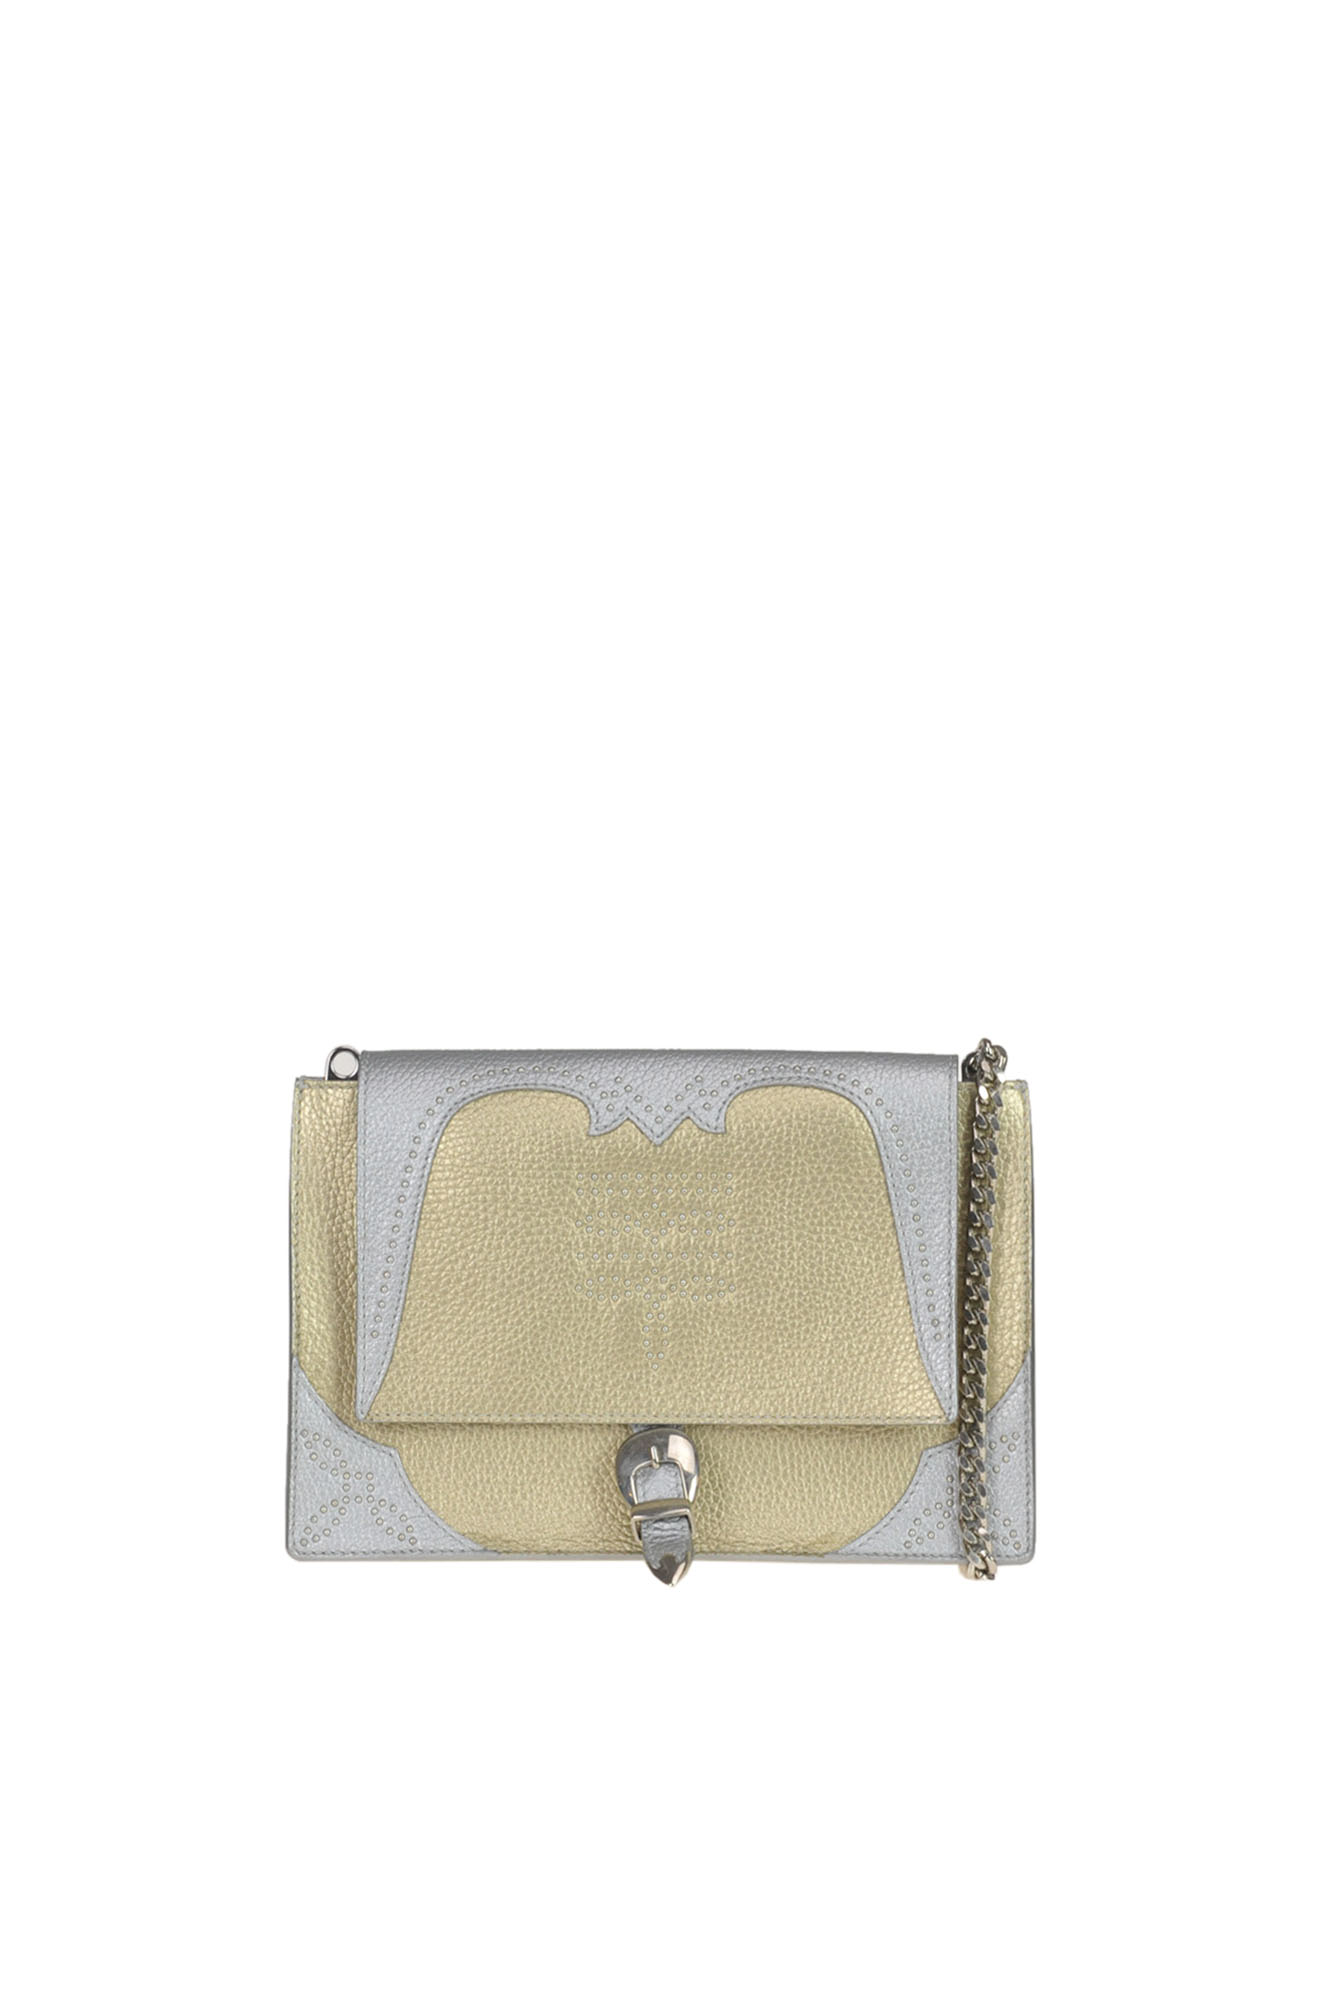 Orciani Metallic Effect Leather Bag In Gold